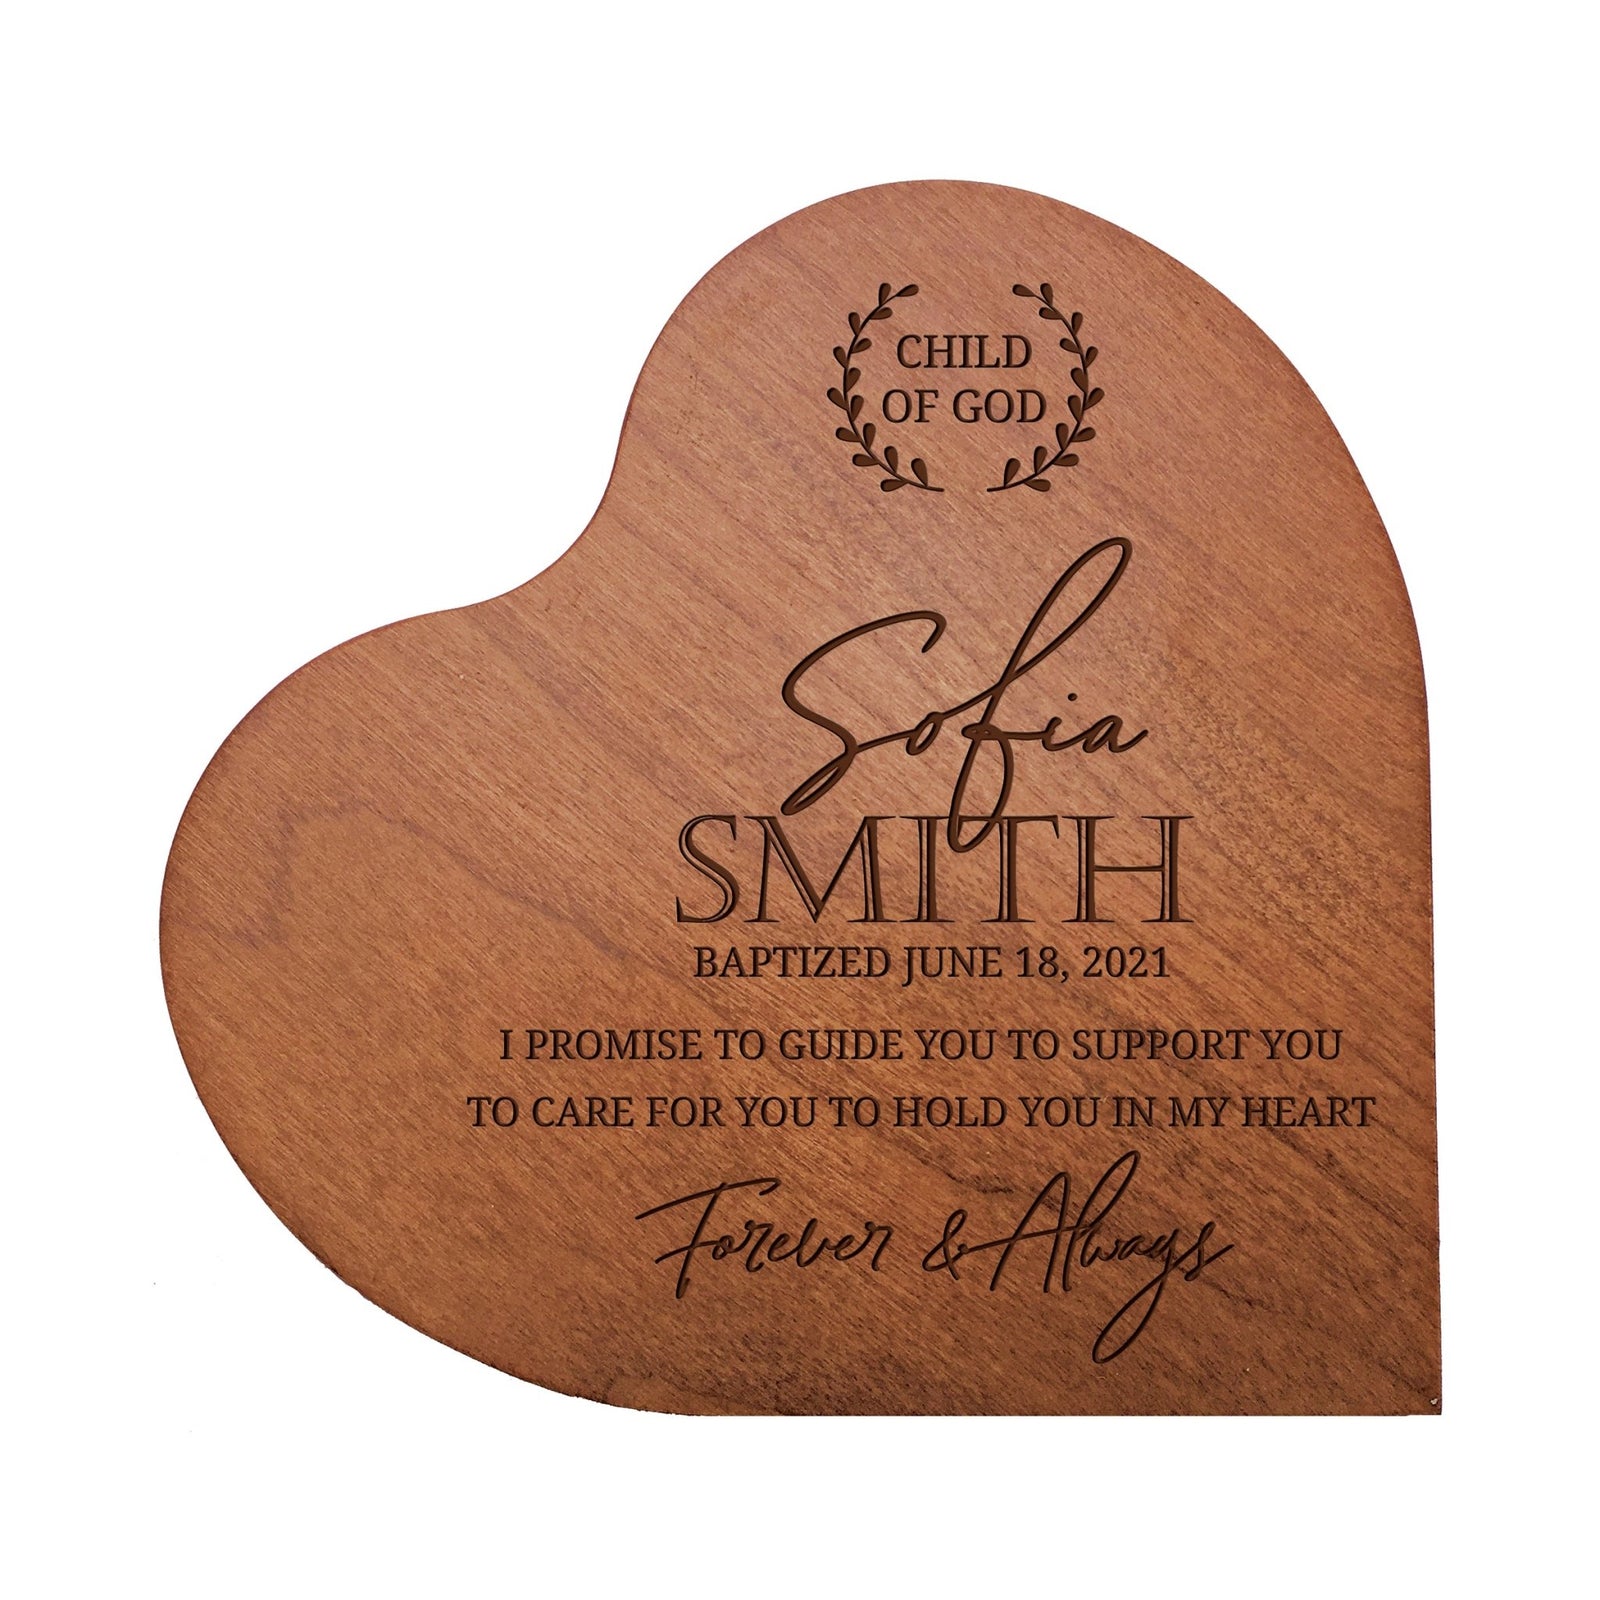 Personalized Engraved Baptism Heart Shaped Tabletop Signs Gift for Goddaughter